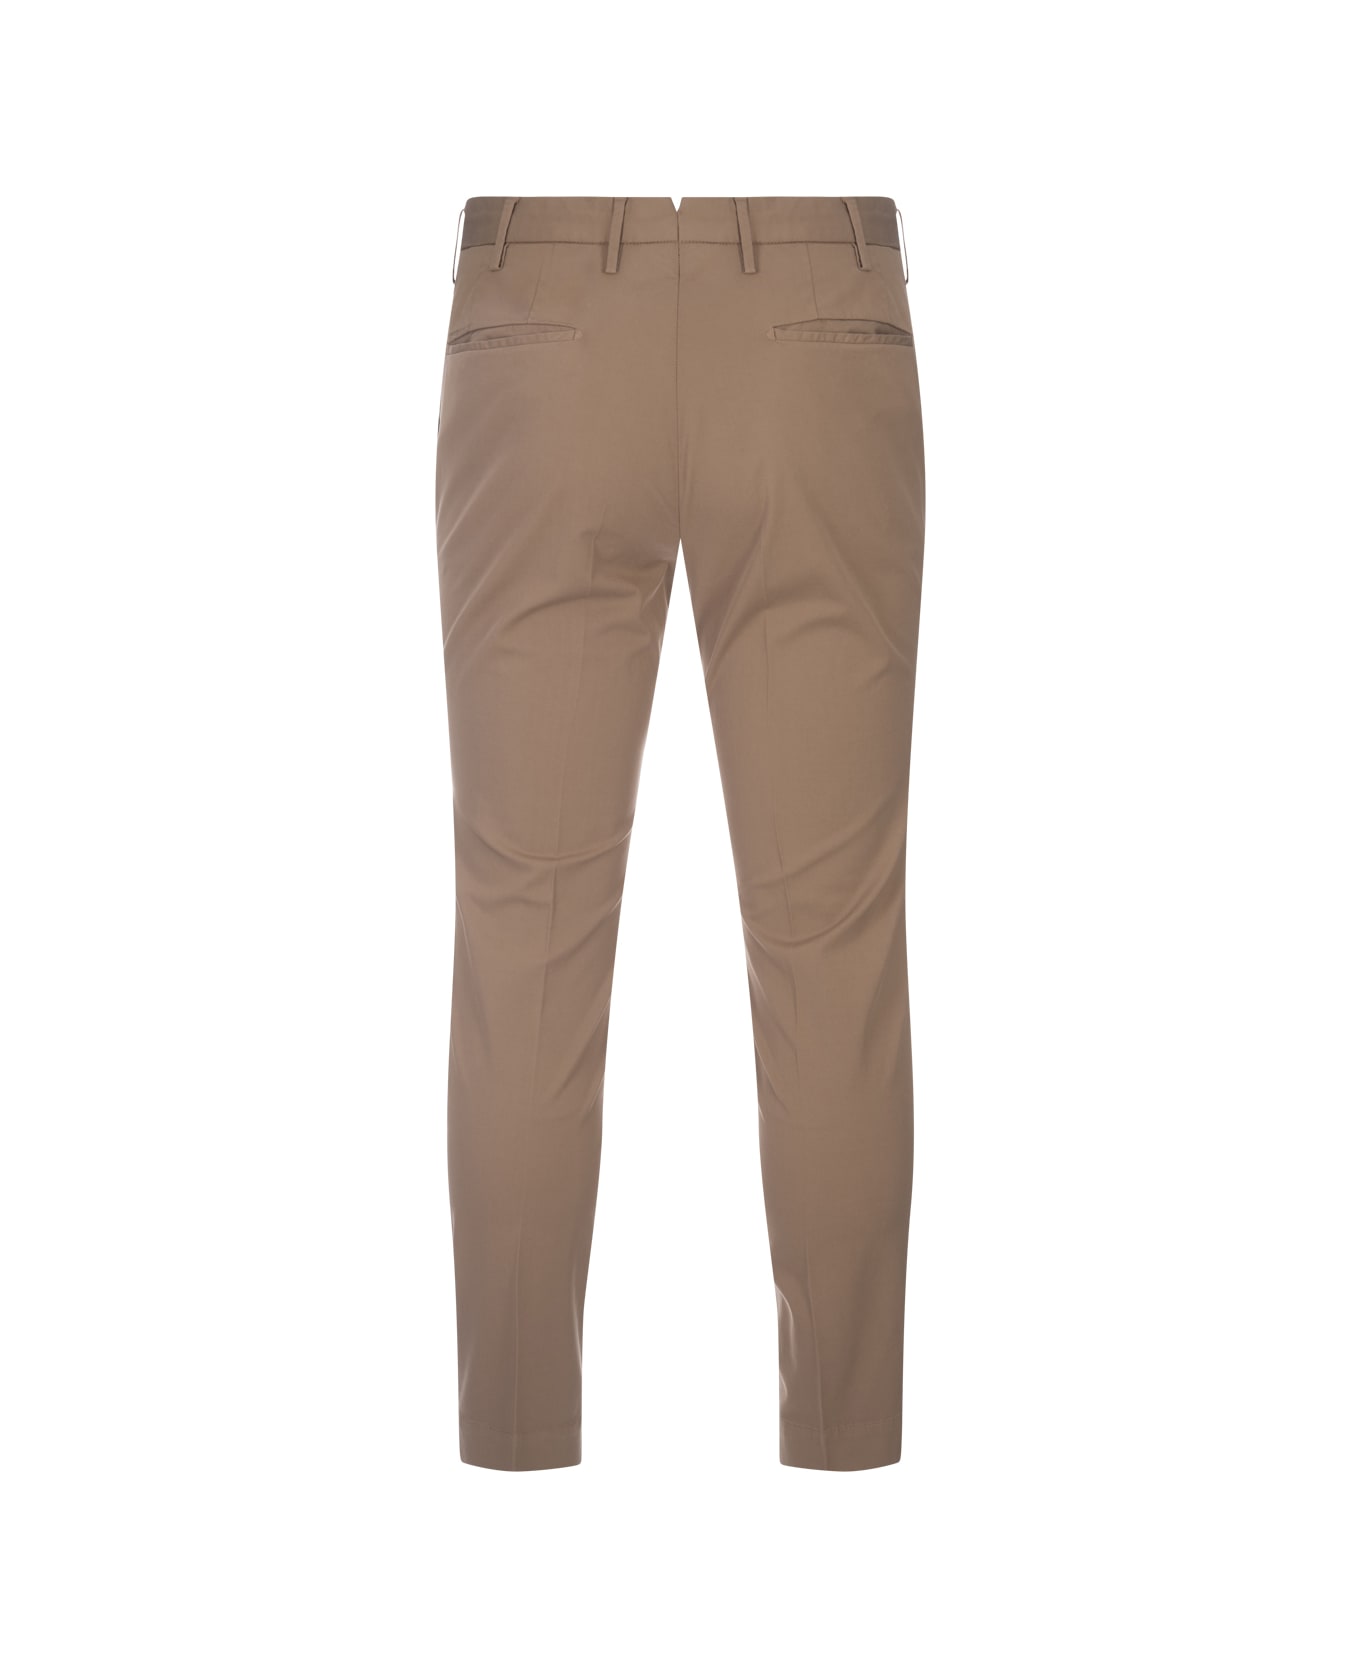 Incotex Beige Tight Fit Trousers - Brown ボトムス